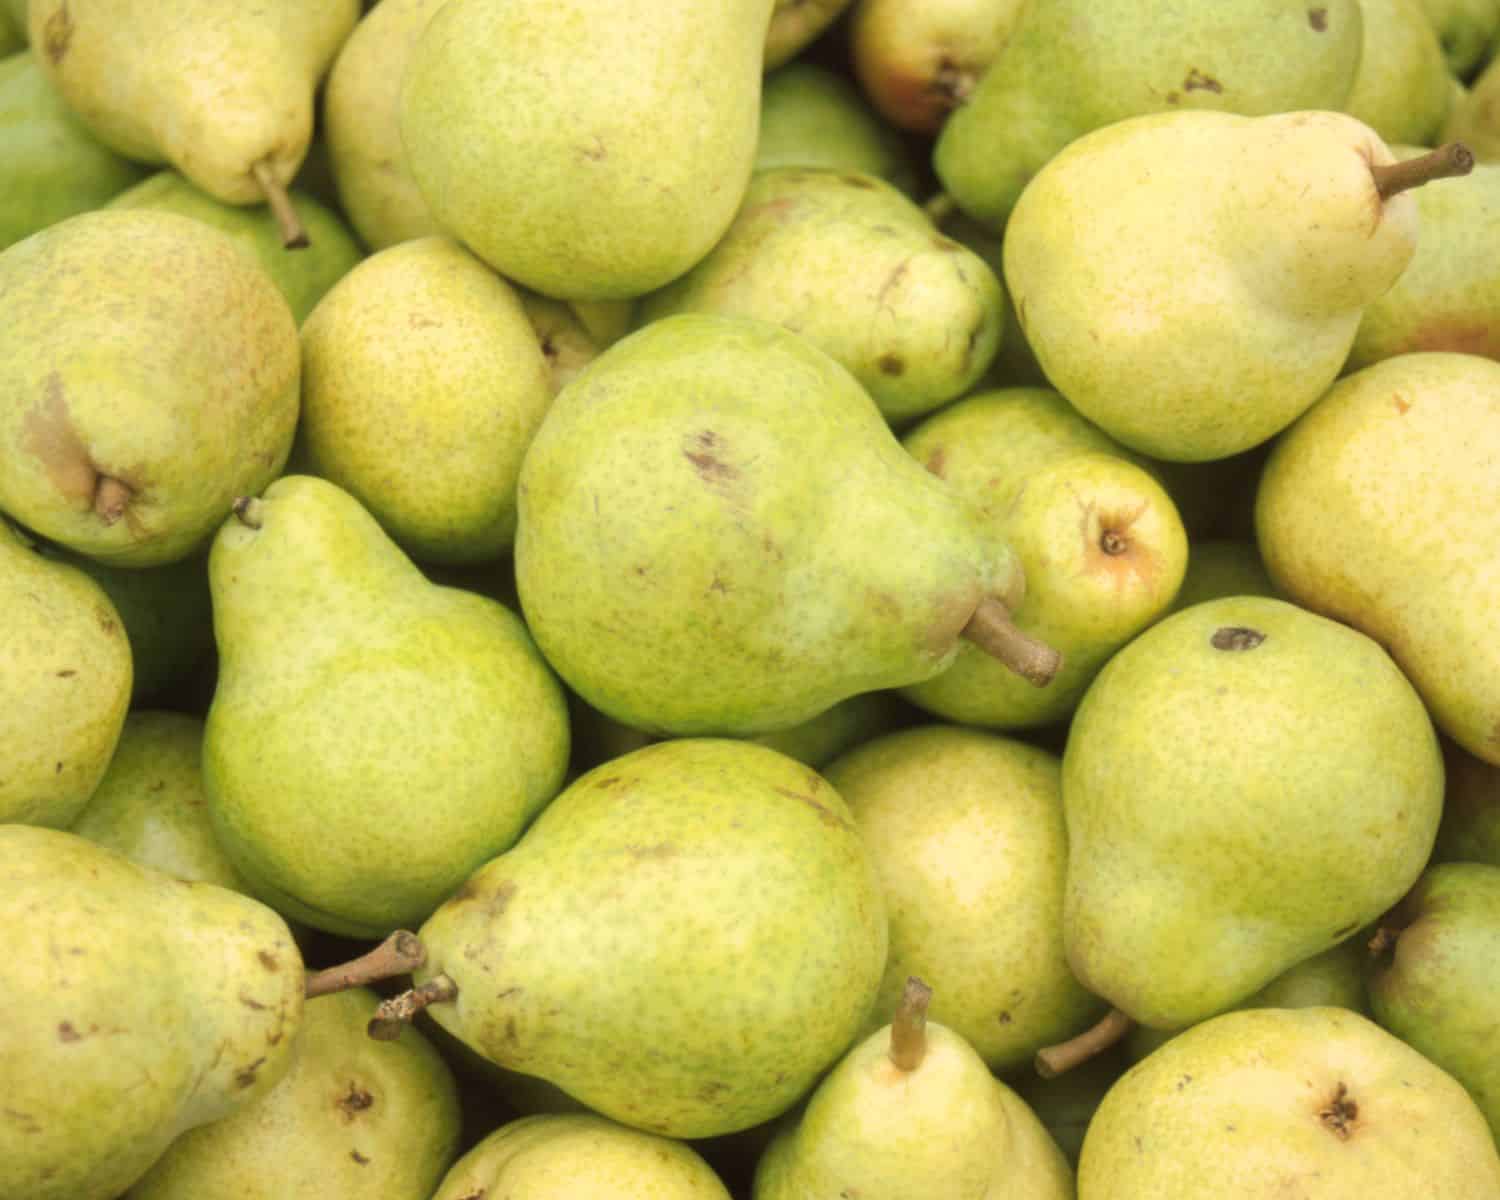 a full frame photo of pears.